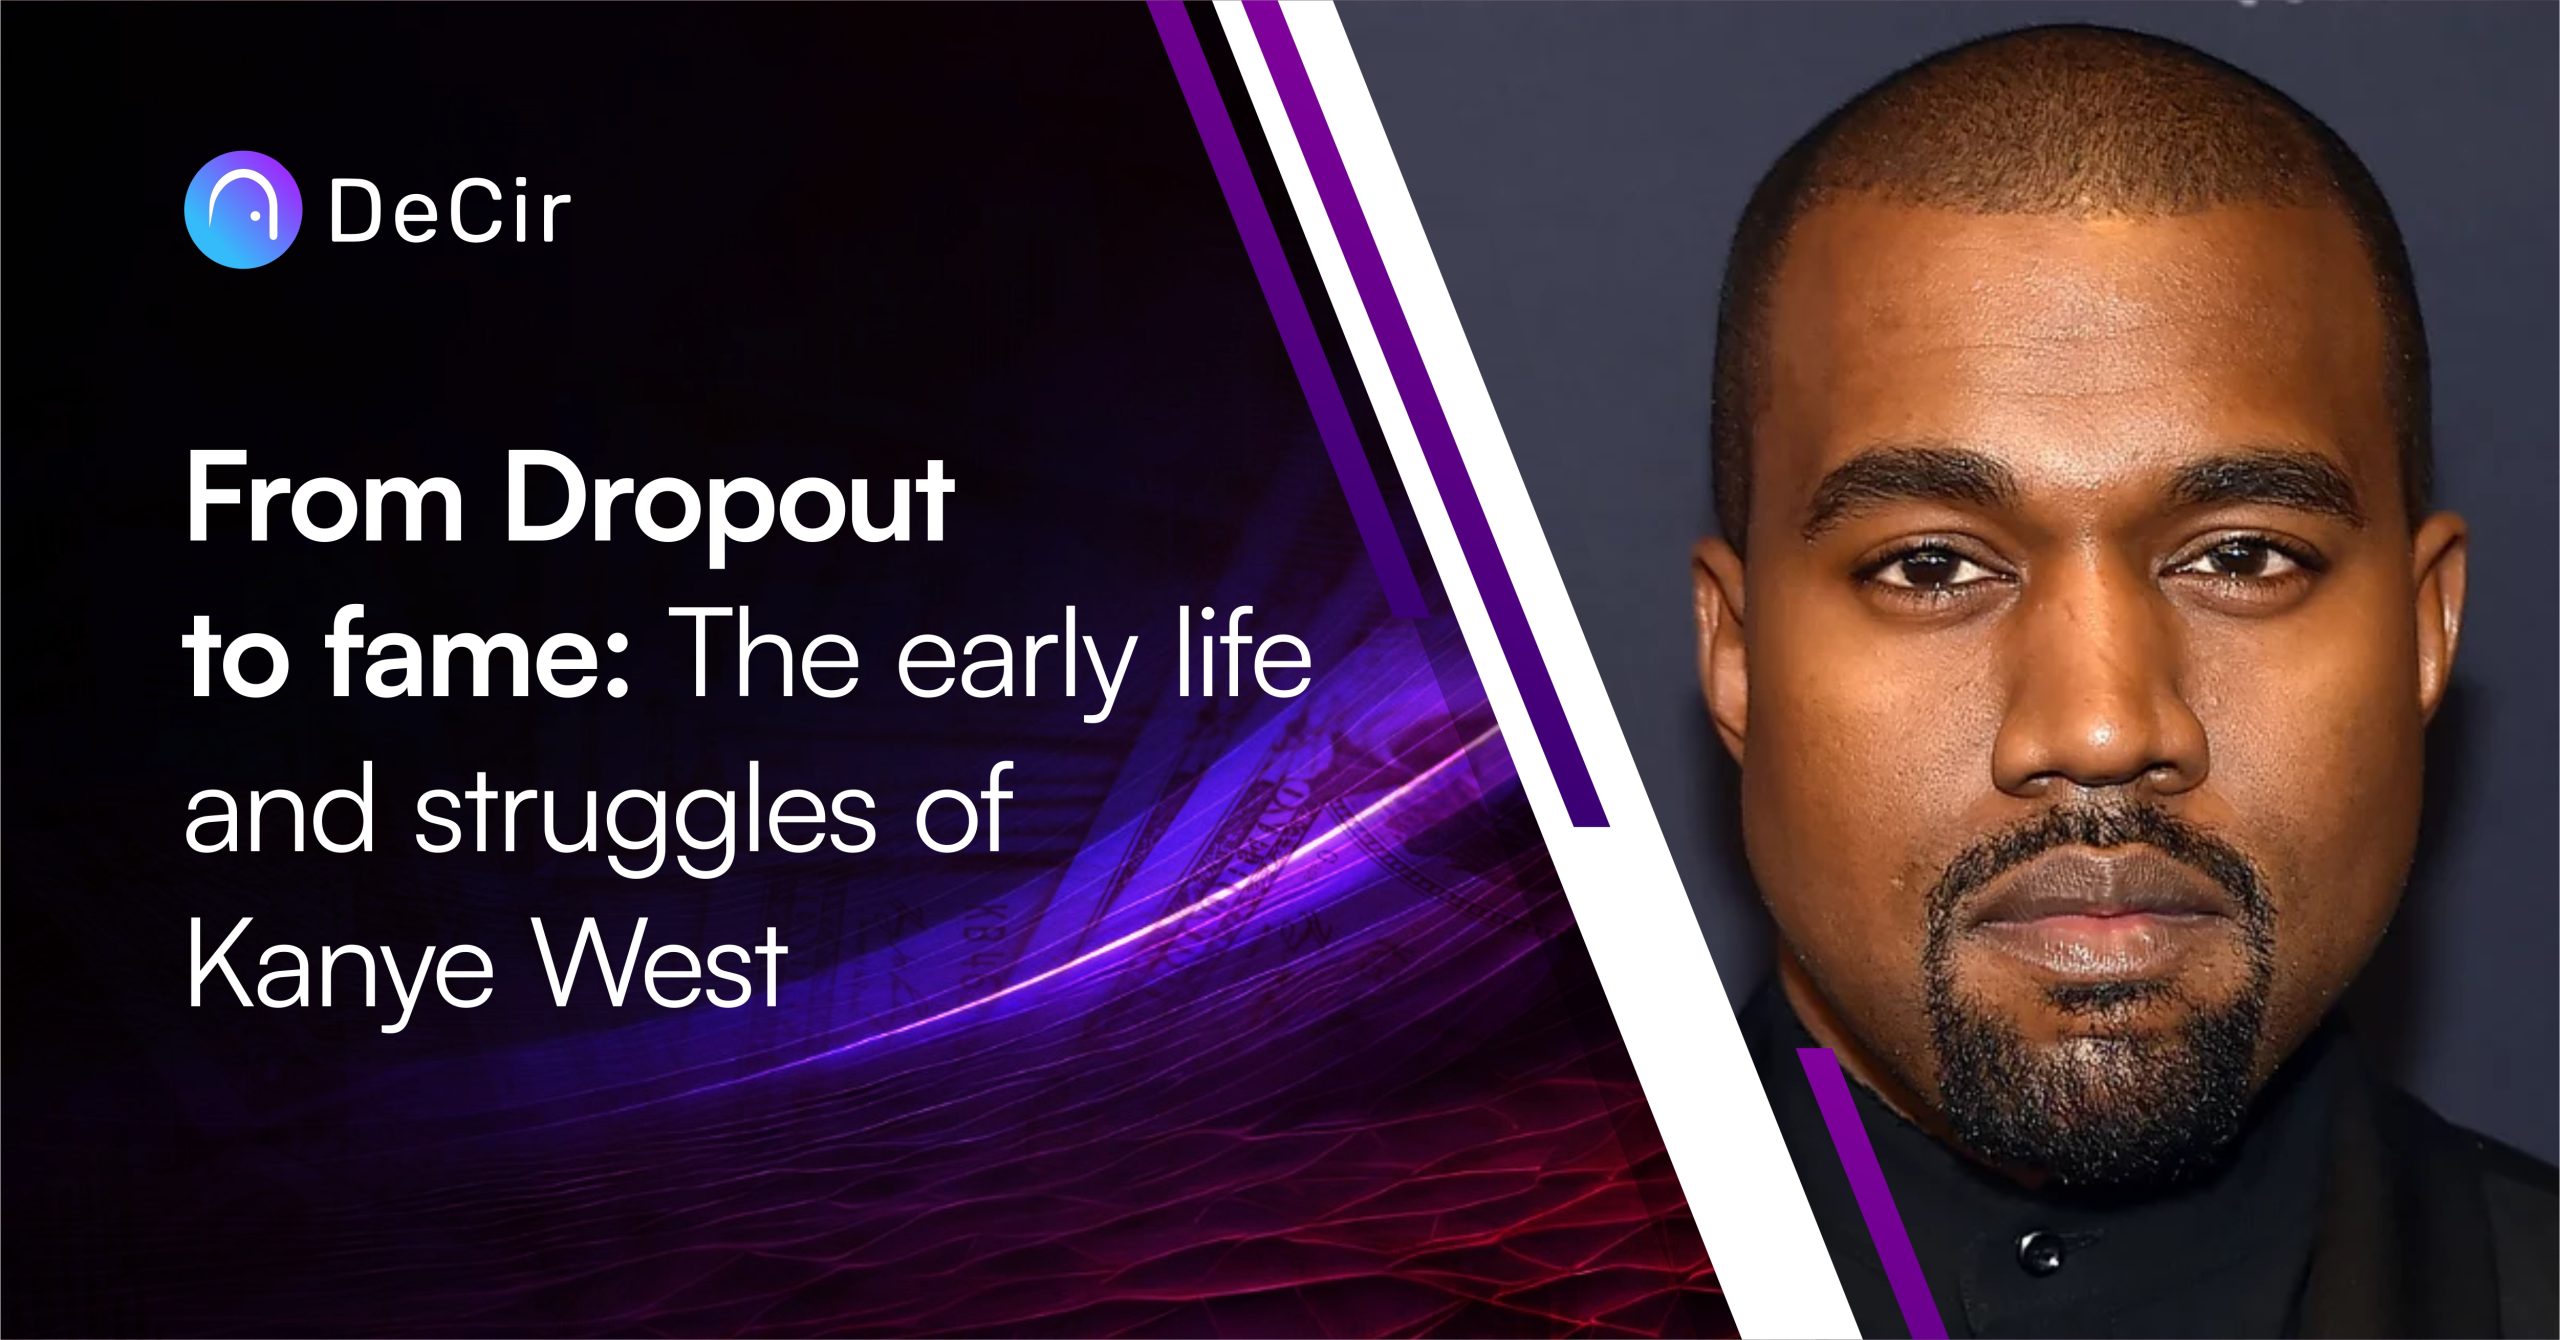 From dropout to fame: The Life and Struggles of Kanye West